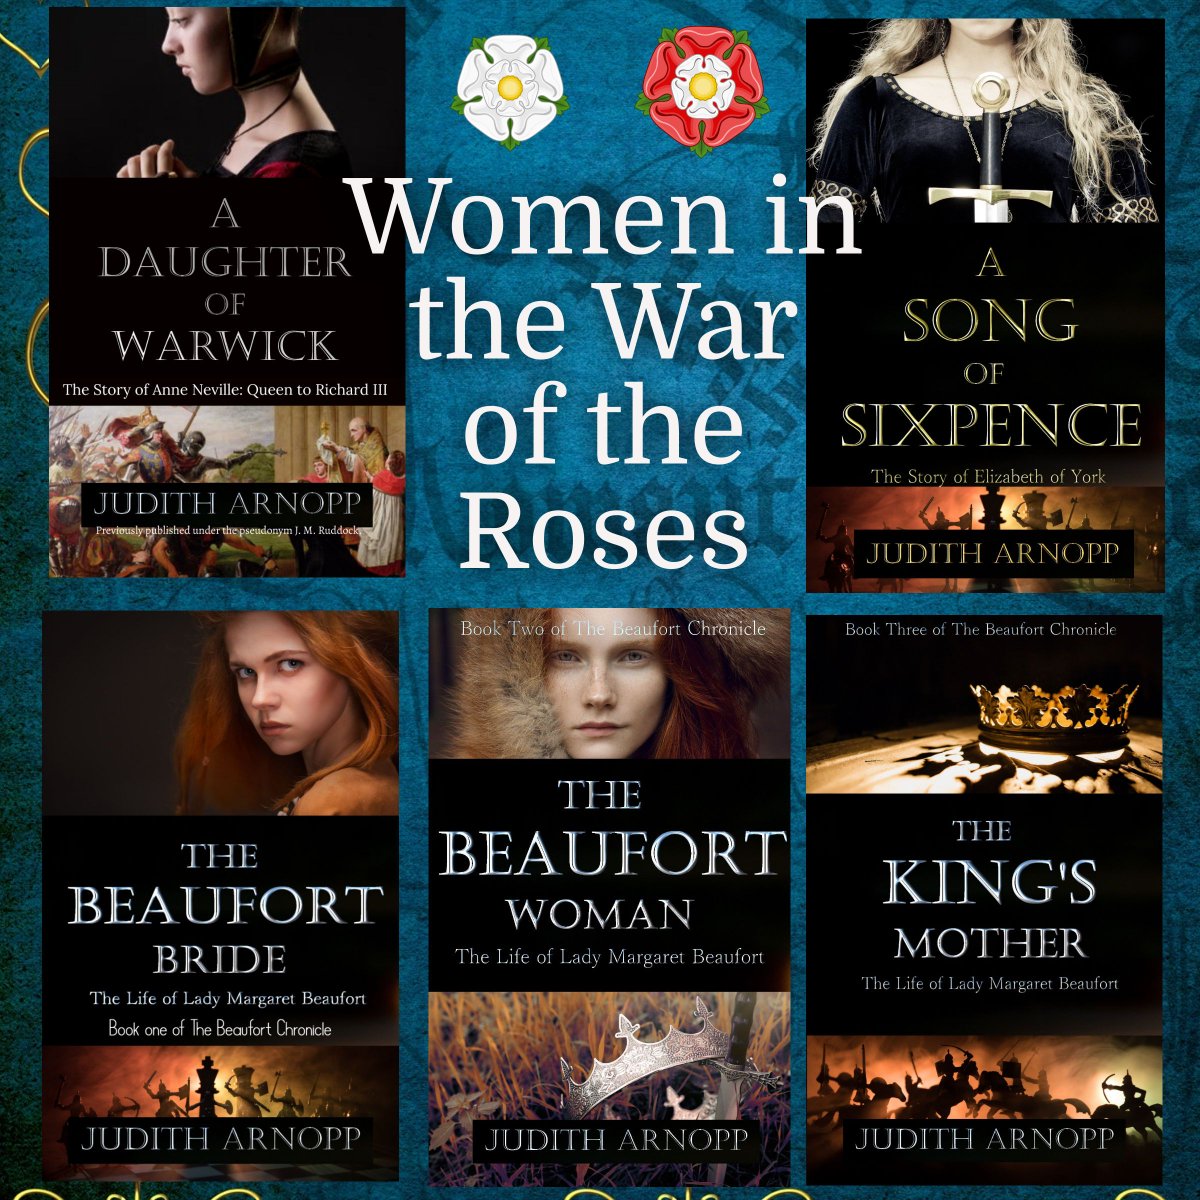 #Read about the Women of the war of the roses: Margaret Beaufort, Anne Neville, Elizabeth of York author.to/juditharnoppbo… #HistoricalFiction #WomensHistoryMonth #wotr #medieval